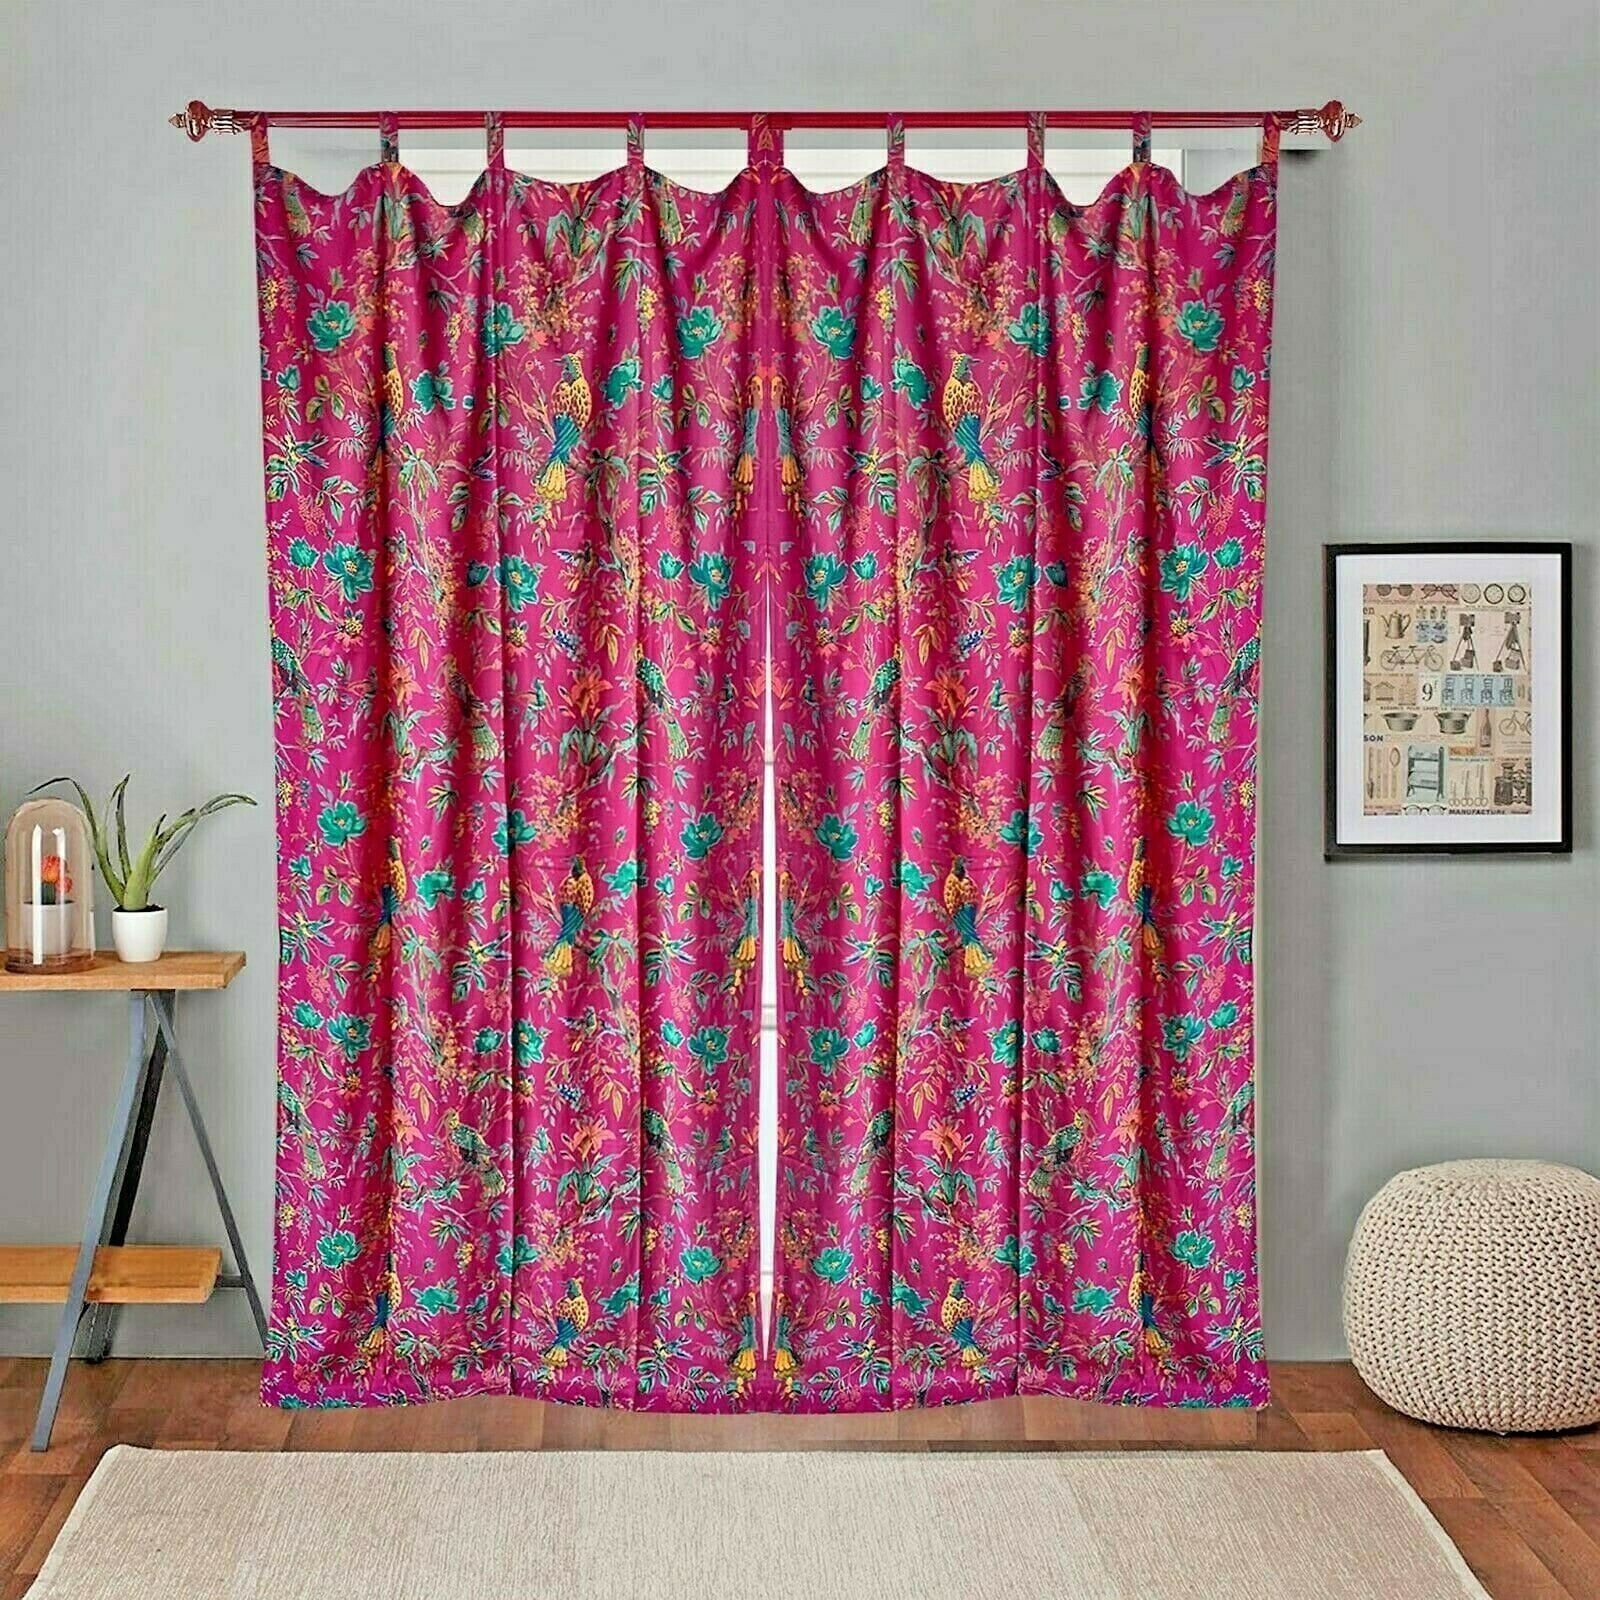 Frida Kahlo boho curtains, eclectic curtains, Frida curtains, boho decor, boho curtain panels, boho home decor TWO PANELS, Christmas gift